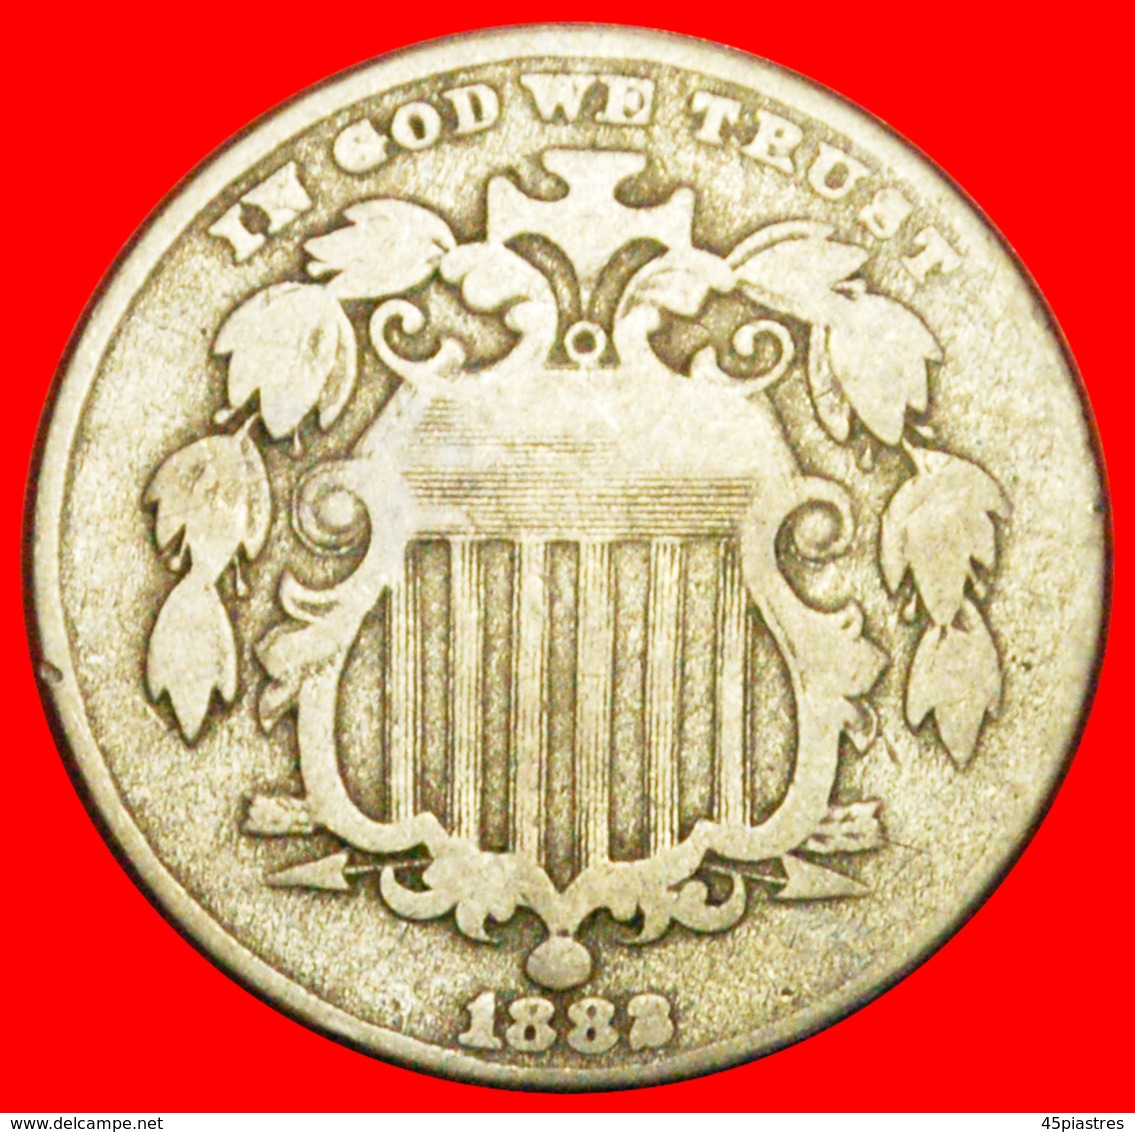 √ NOT WITH RAYS (1866-1883): USA ★ 5 CENTS 1882 SHIELD! LOW START ★ NO RESERVE! - 1866-83: Shield